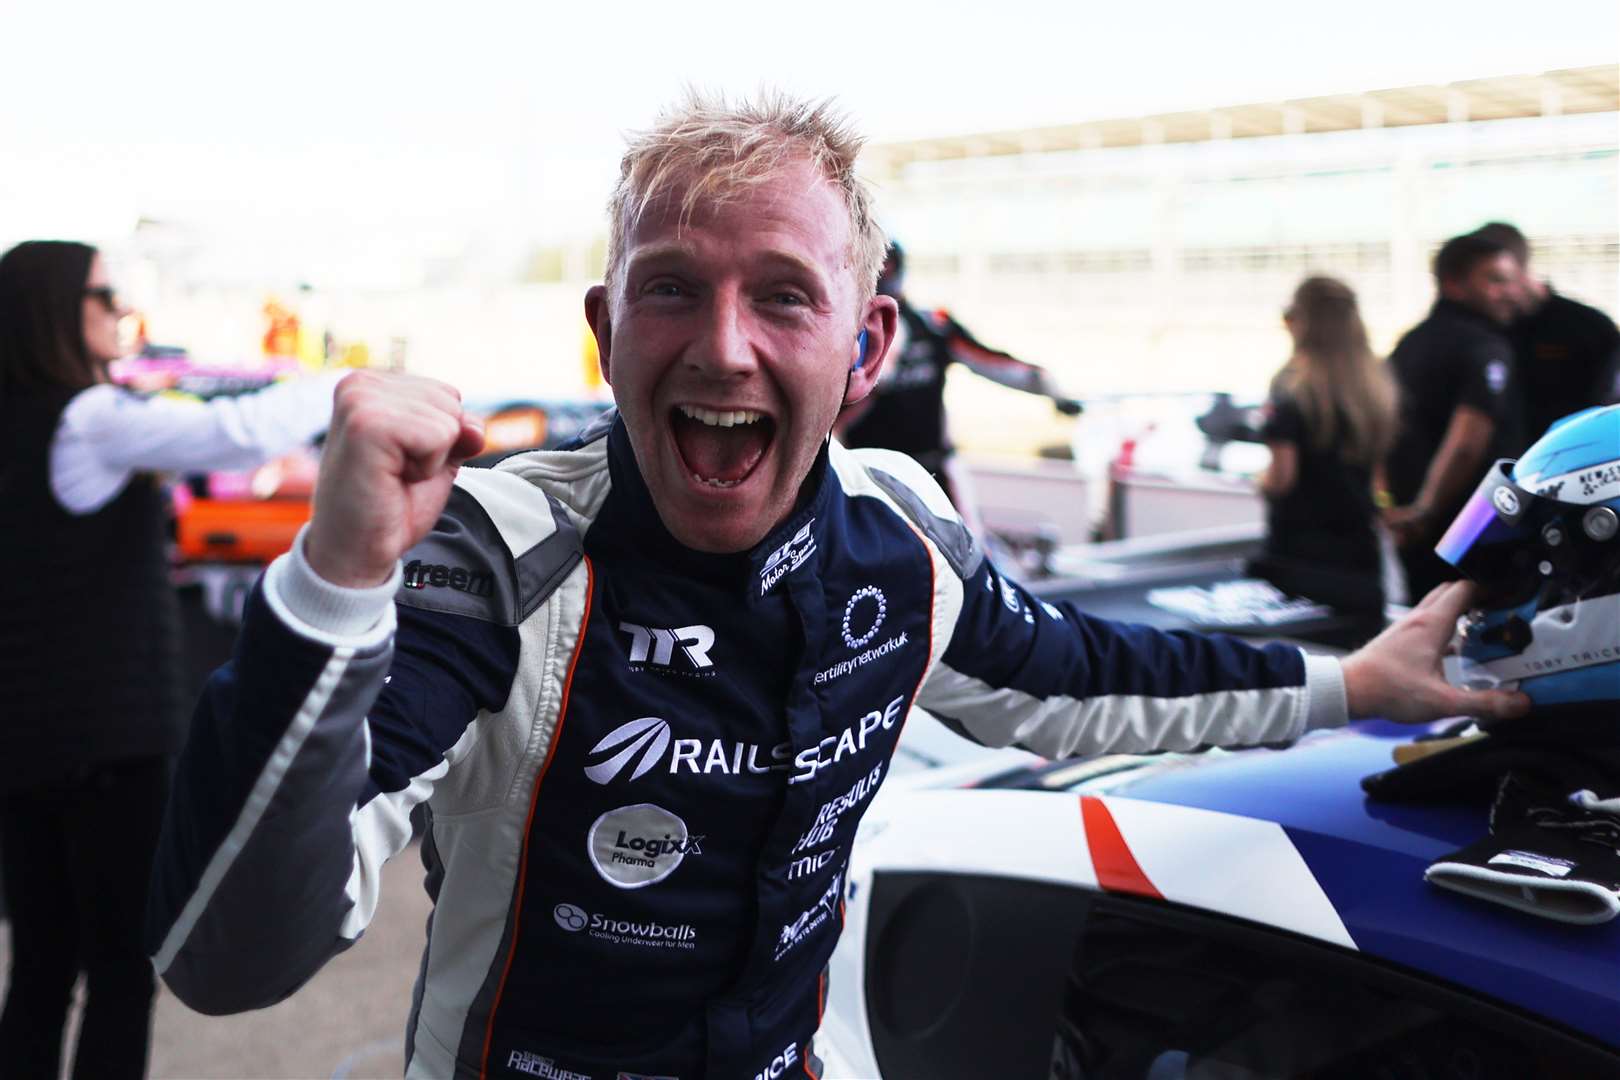 Celebrating becoming the first ever Ginetta GT Academy champion Picture: Jakob Ebrey